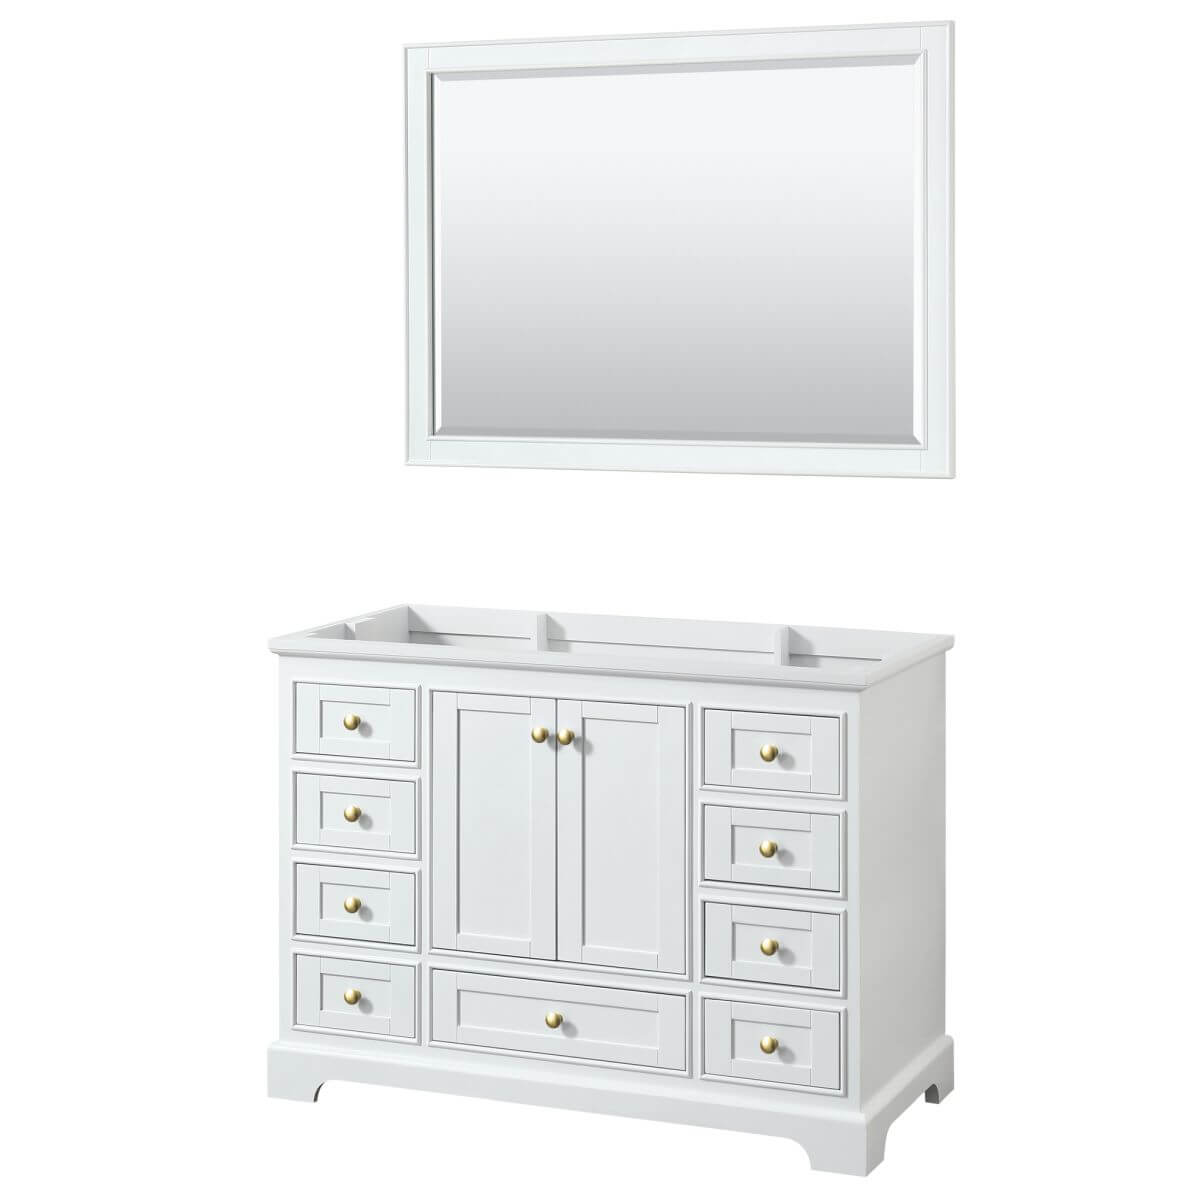 Wyndham Collection Deborah 48 inch Single Bathroom Vanity in White with 46 inch Mirror, Brushed Gold Trim, No Countertop and No Sink - WCS202048SWGCXSXXM46